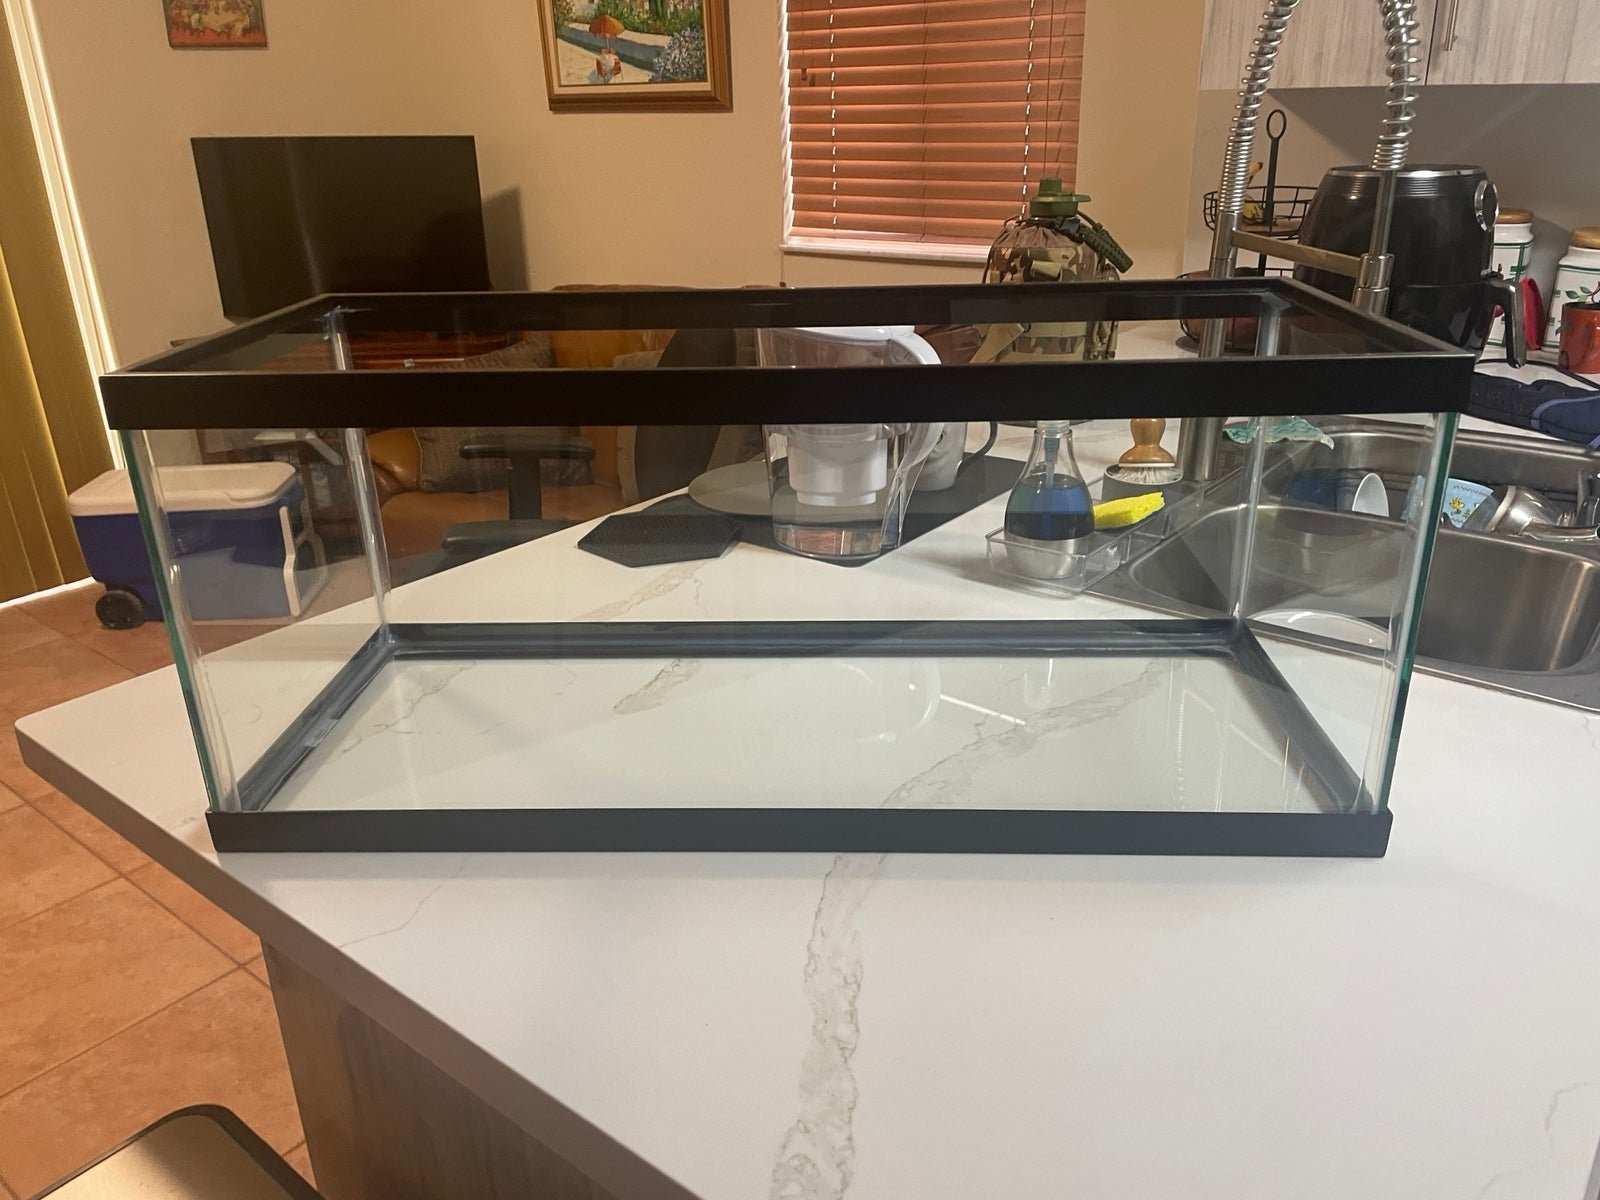 20 gallon fish tank used  LOCAL PICKUP ONLY no I can’t ship it. PAl6jhz0W